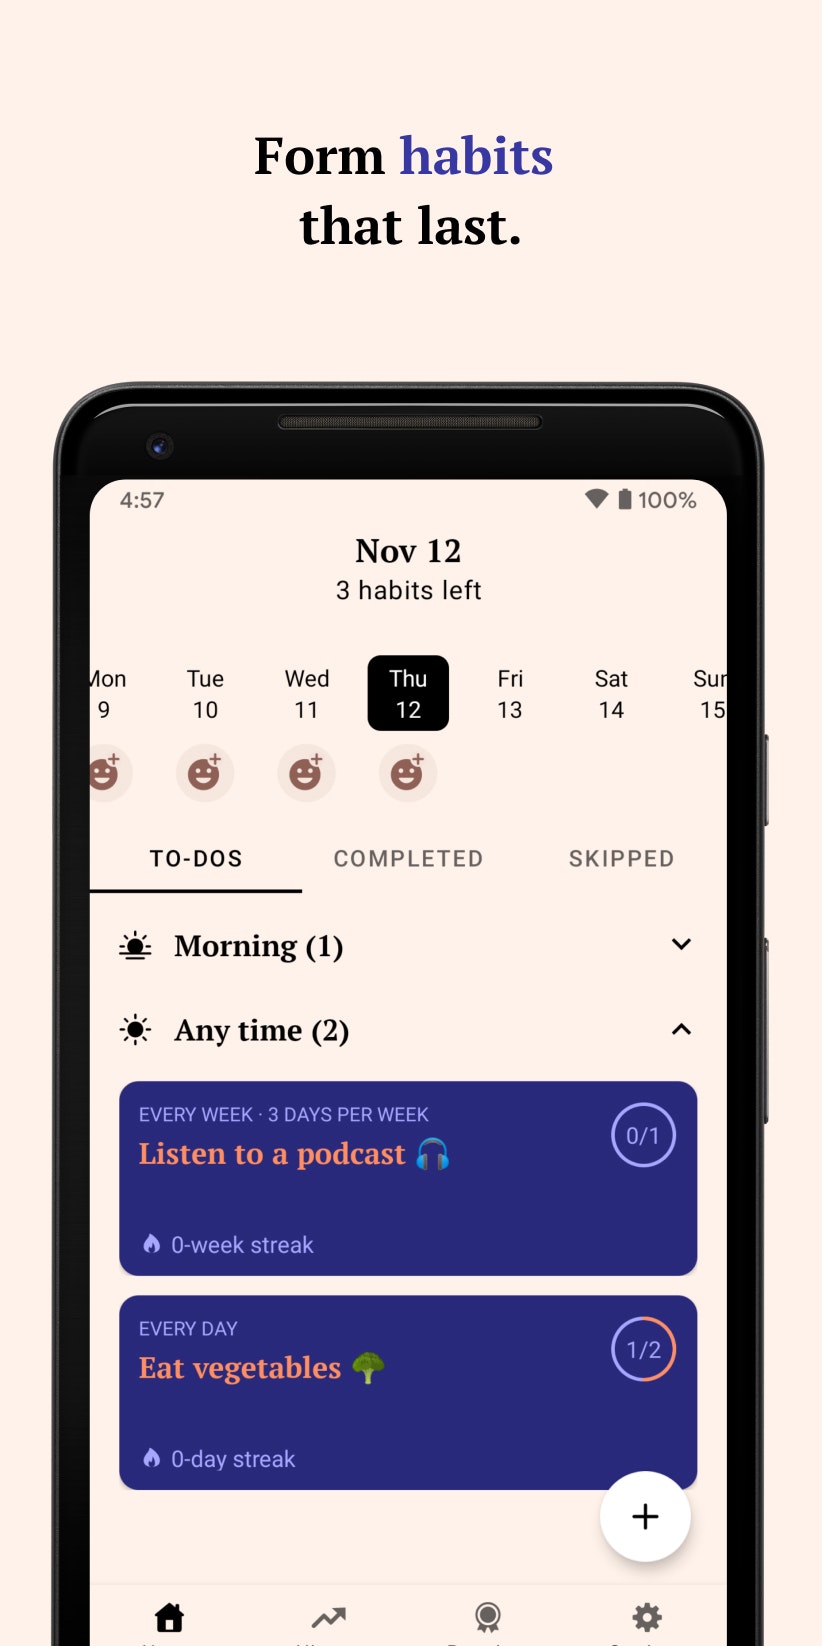 advanced diary for android